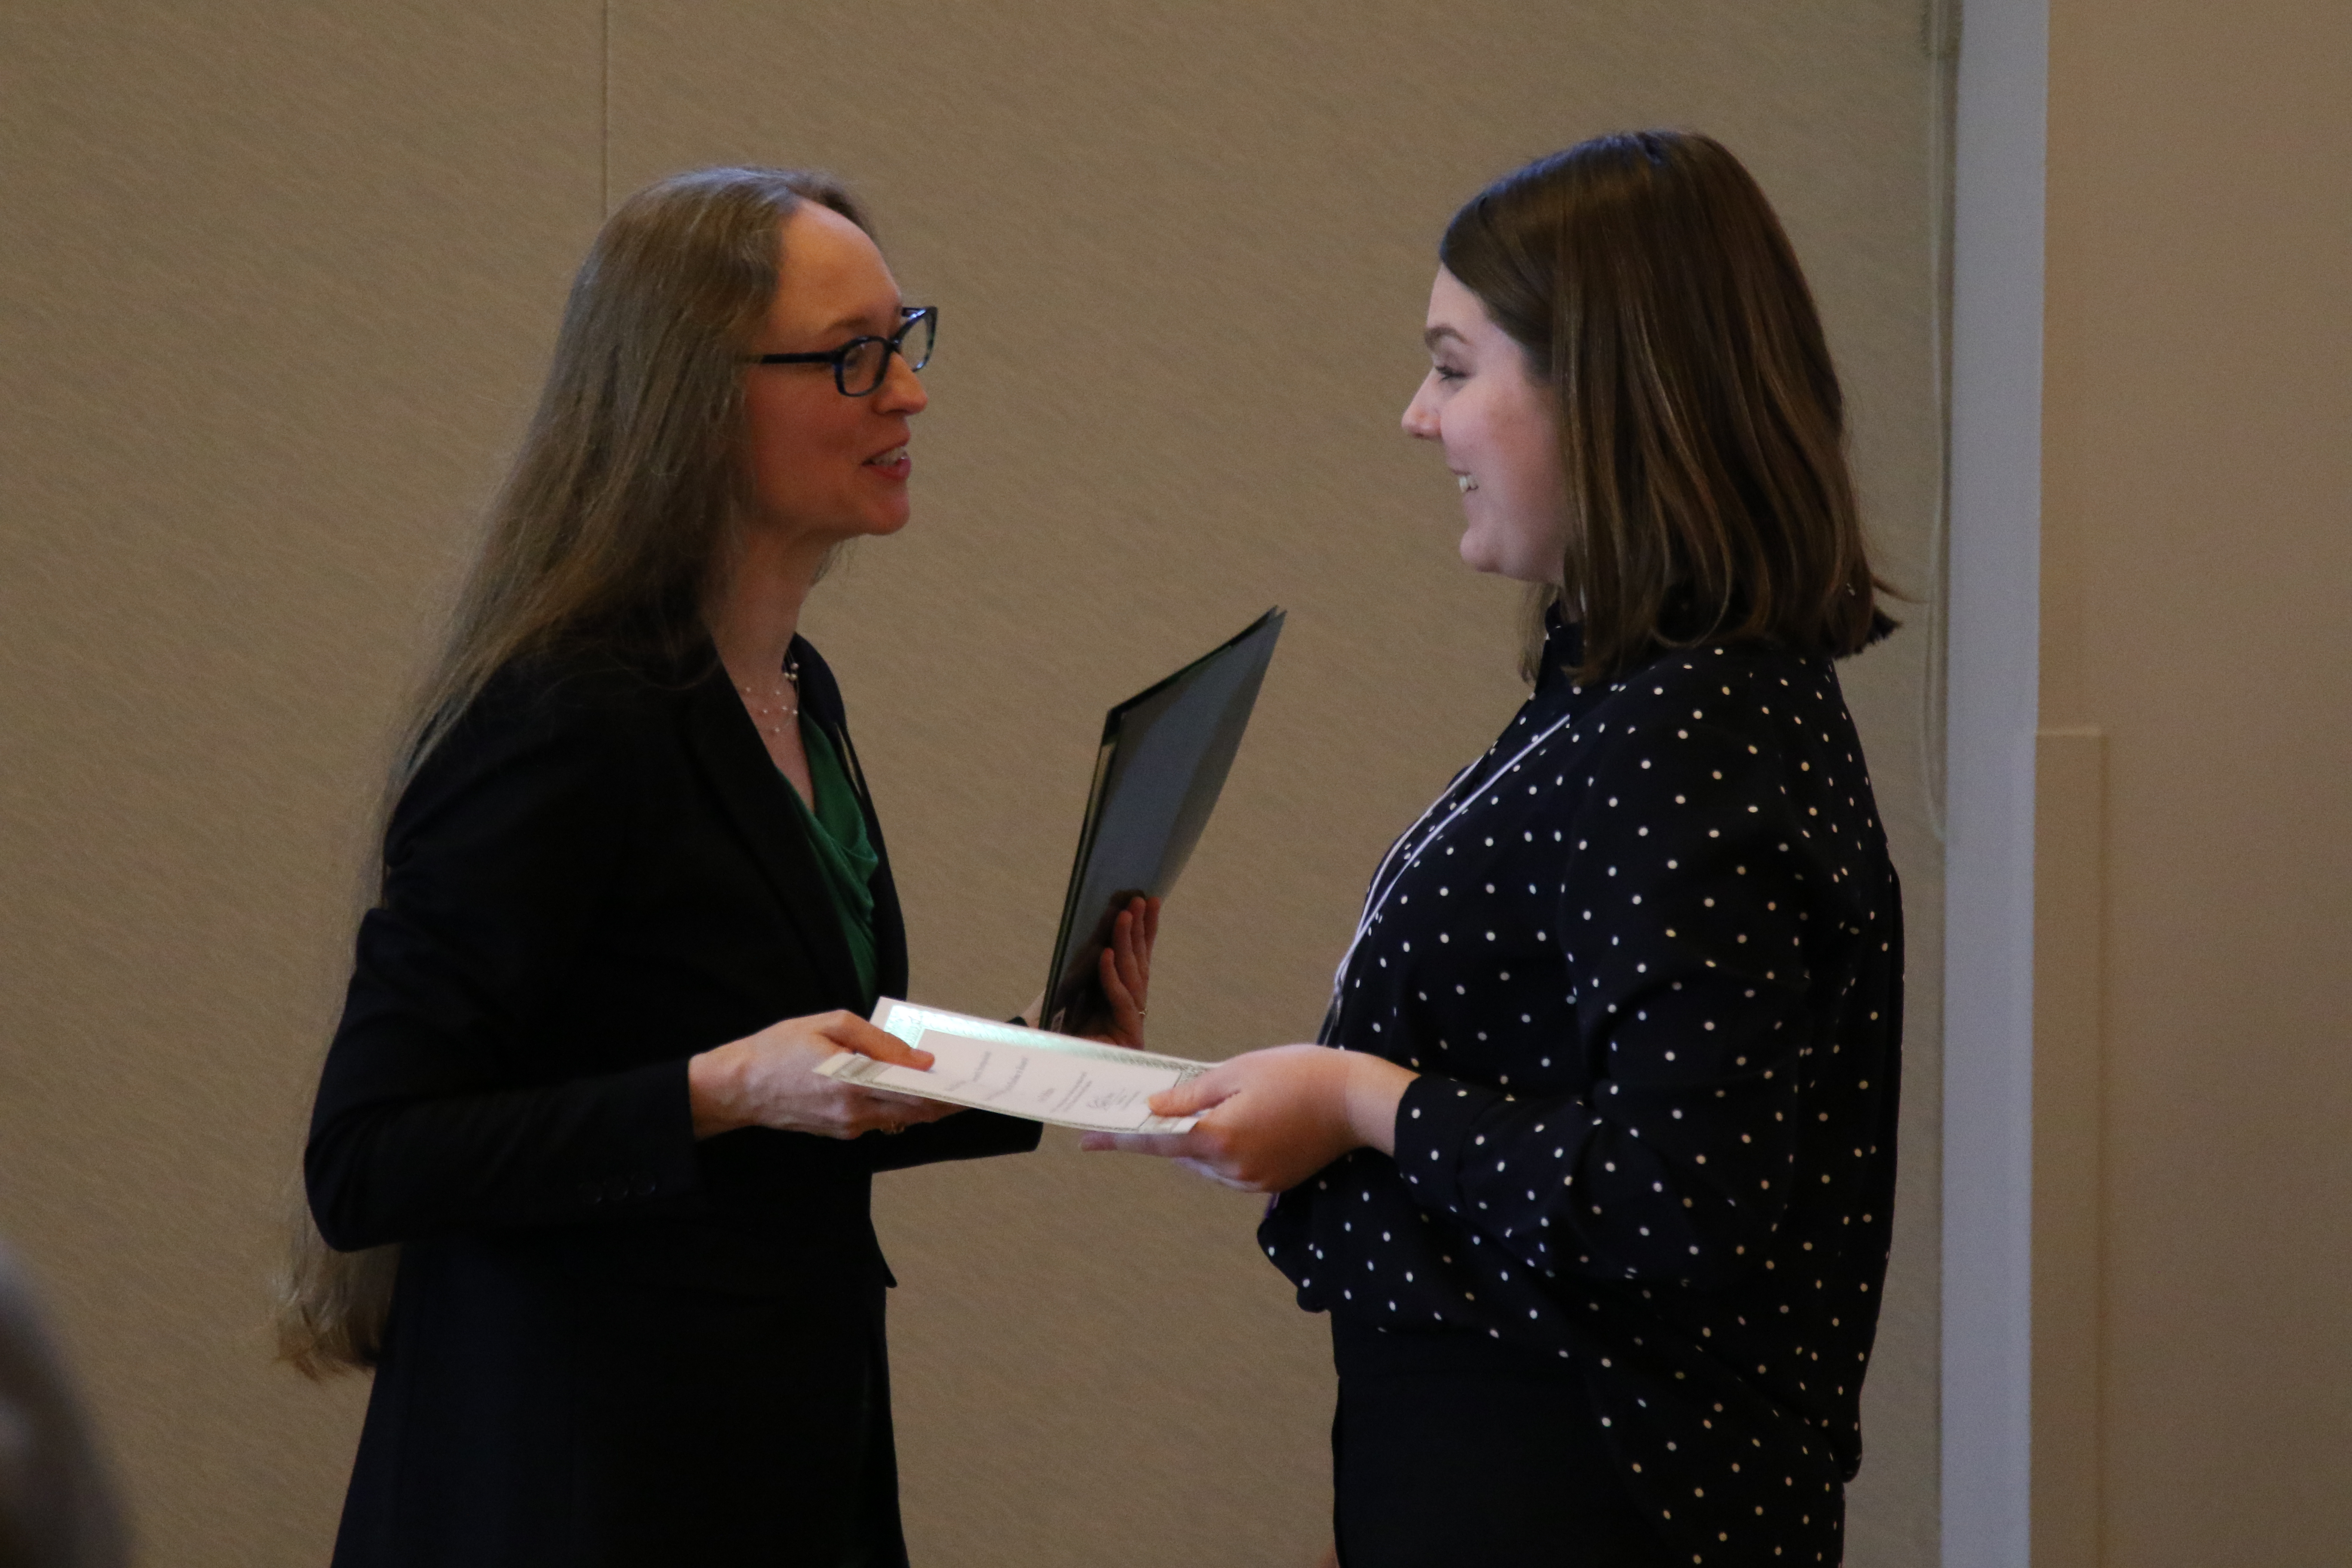 Pictured: Grace DeSalvo, top award winner, accepts certificate from Sarah Glosson, Director of the Arts & Sciences Graduate Center